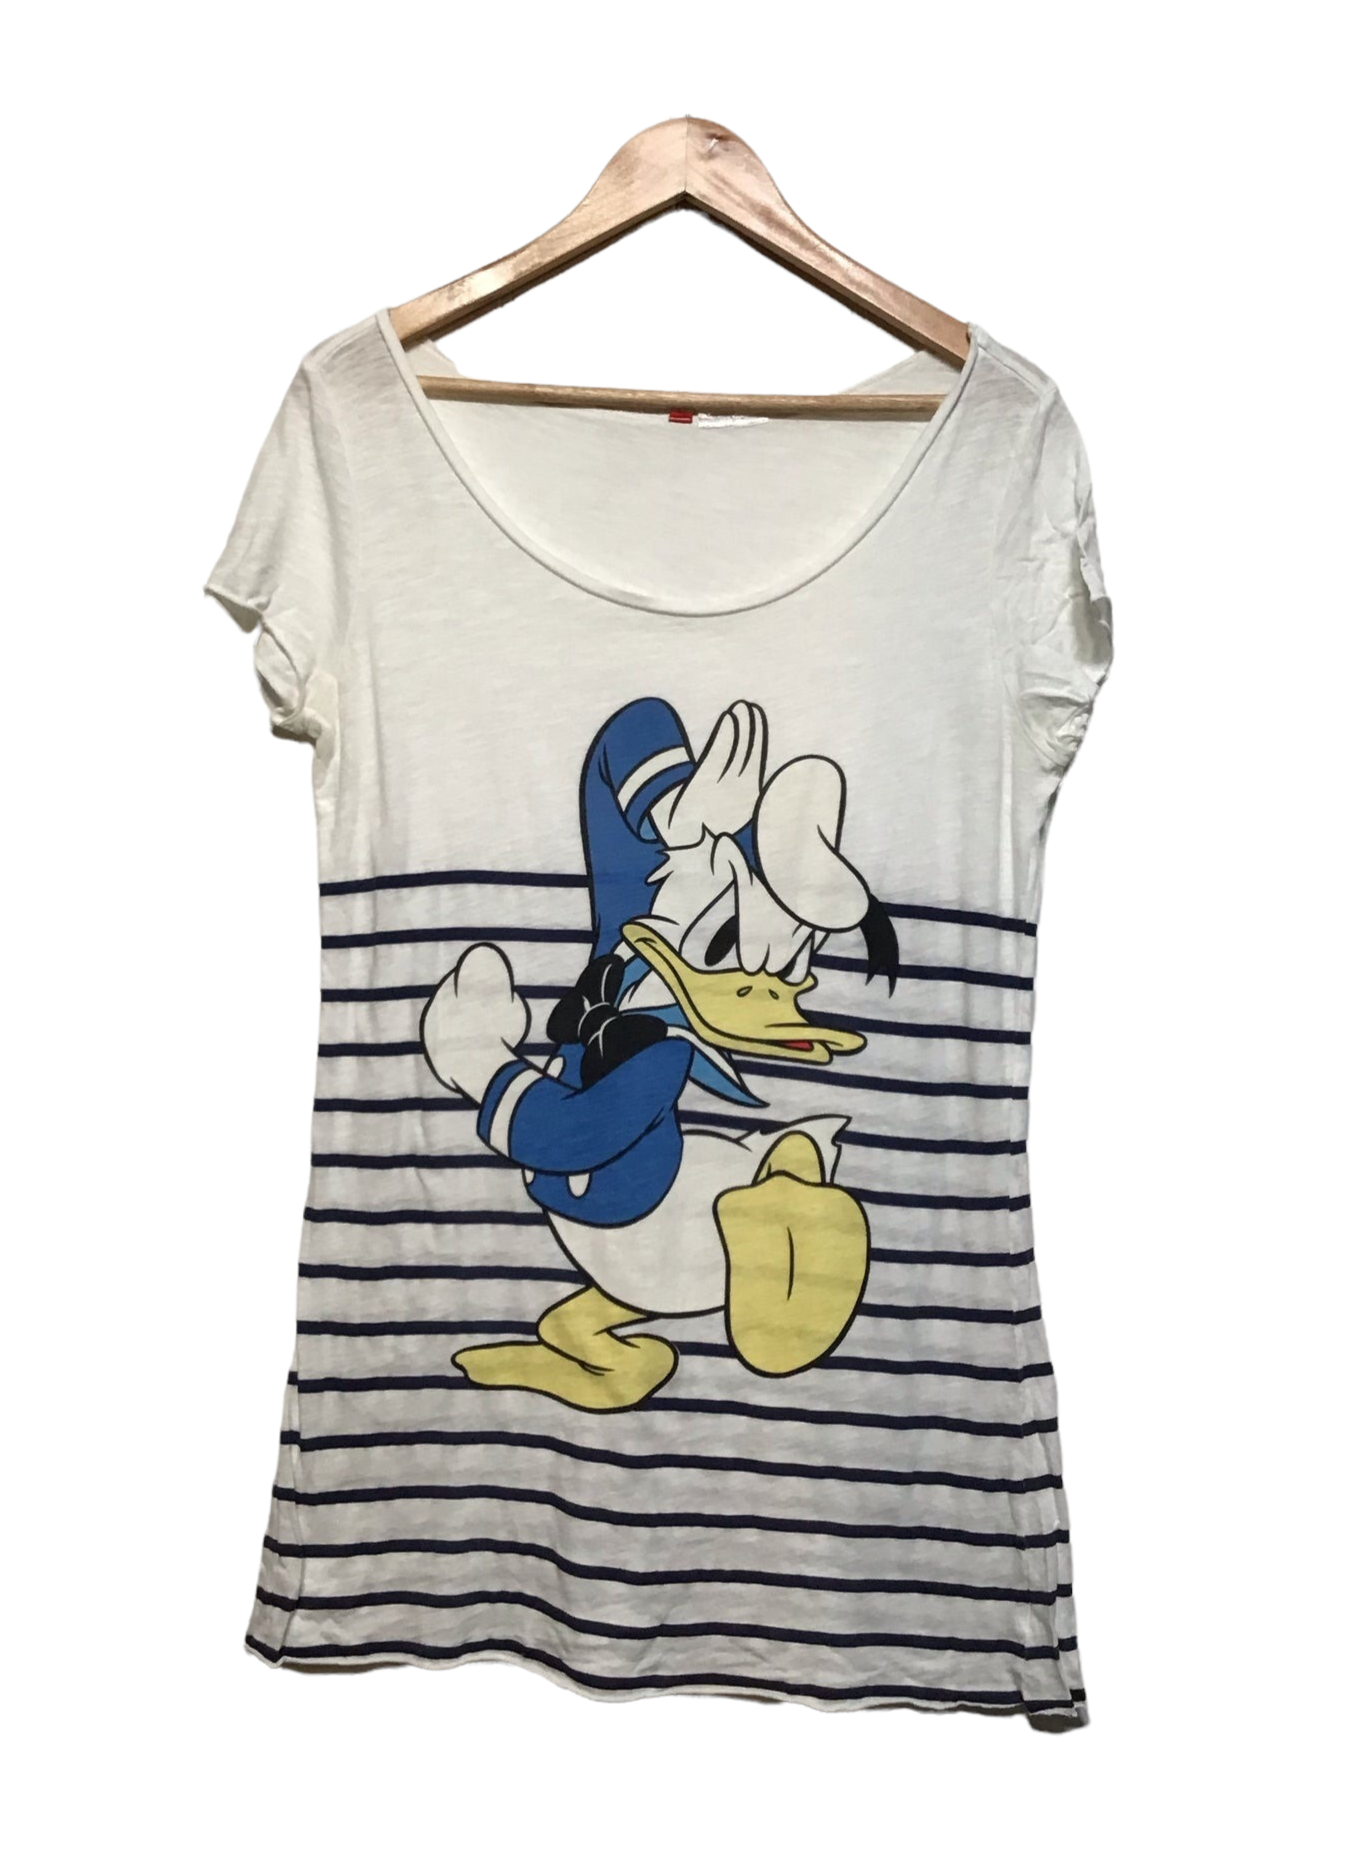 Donald Duck Tee (Size L)